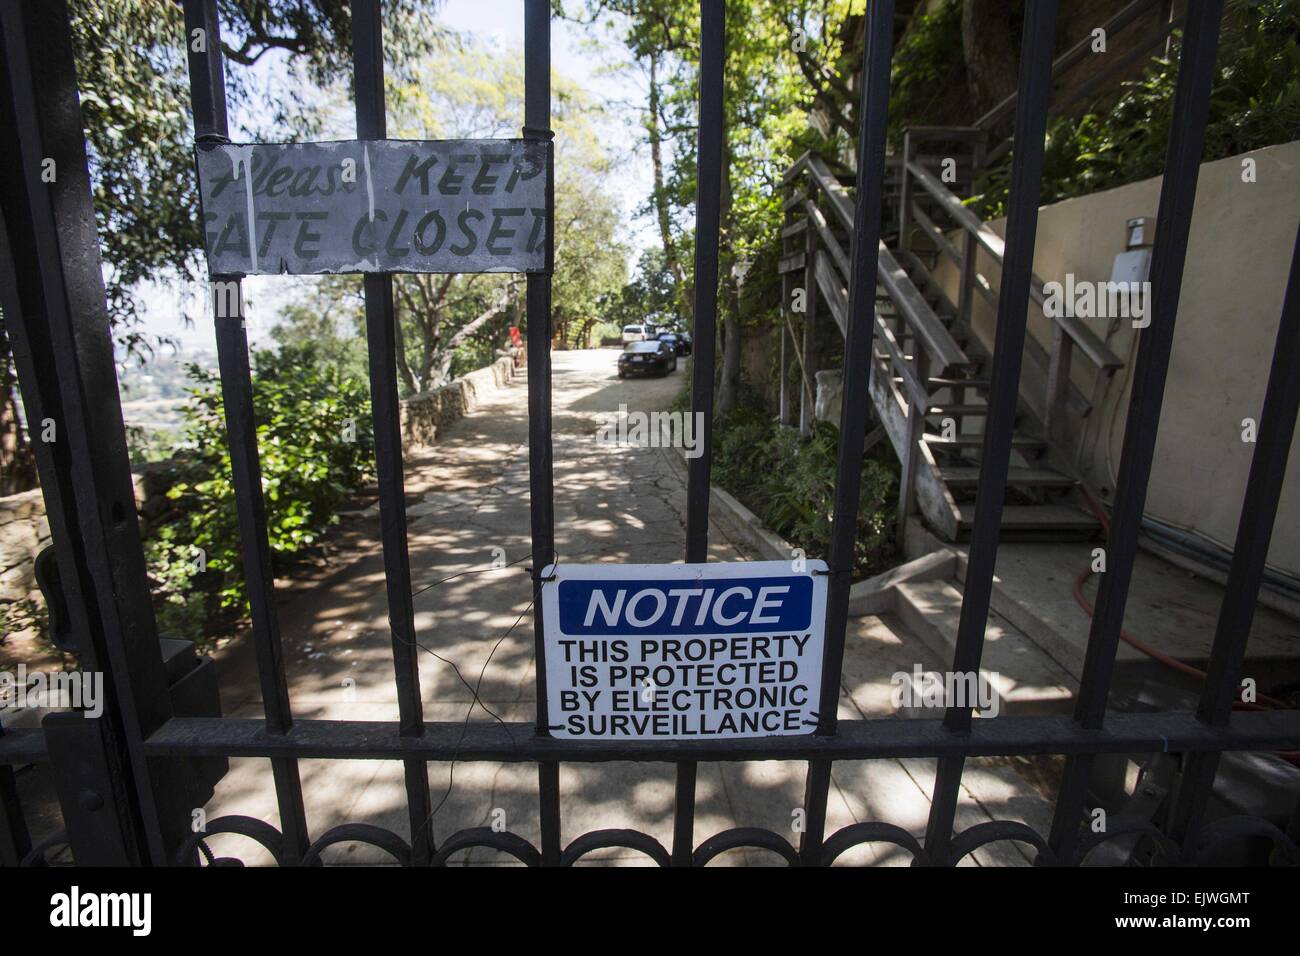 Los Angeles, California, USA. 1st Apr, 2015. The gate of the home of Andrew Getty is seen on Wednesday April 1, 2014 in Los Angeles. Getty, the 47-year-old, grandson of the late oil baron J. Paul Getty, who was found dead at his Hollywood Hills home, suffered from a serious medical condition that put him at ''grave risk of substantial and irreparable injury or death'' if his blood pressure were to suddenly rise, according to court papers obtained today. © Ringo Chiu/ZUMA Wire/Alamy Live News Stock Photo